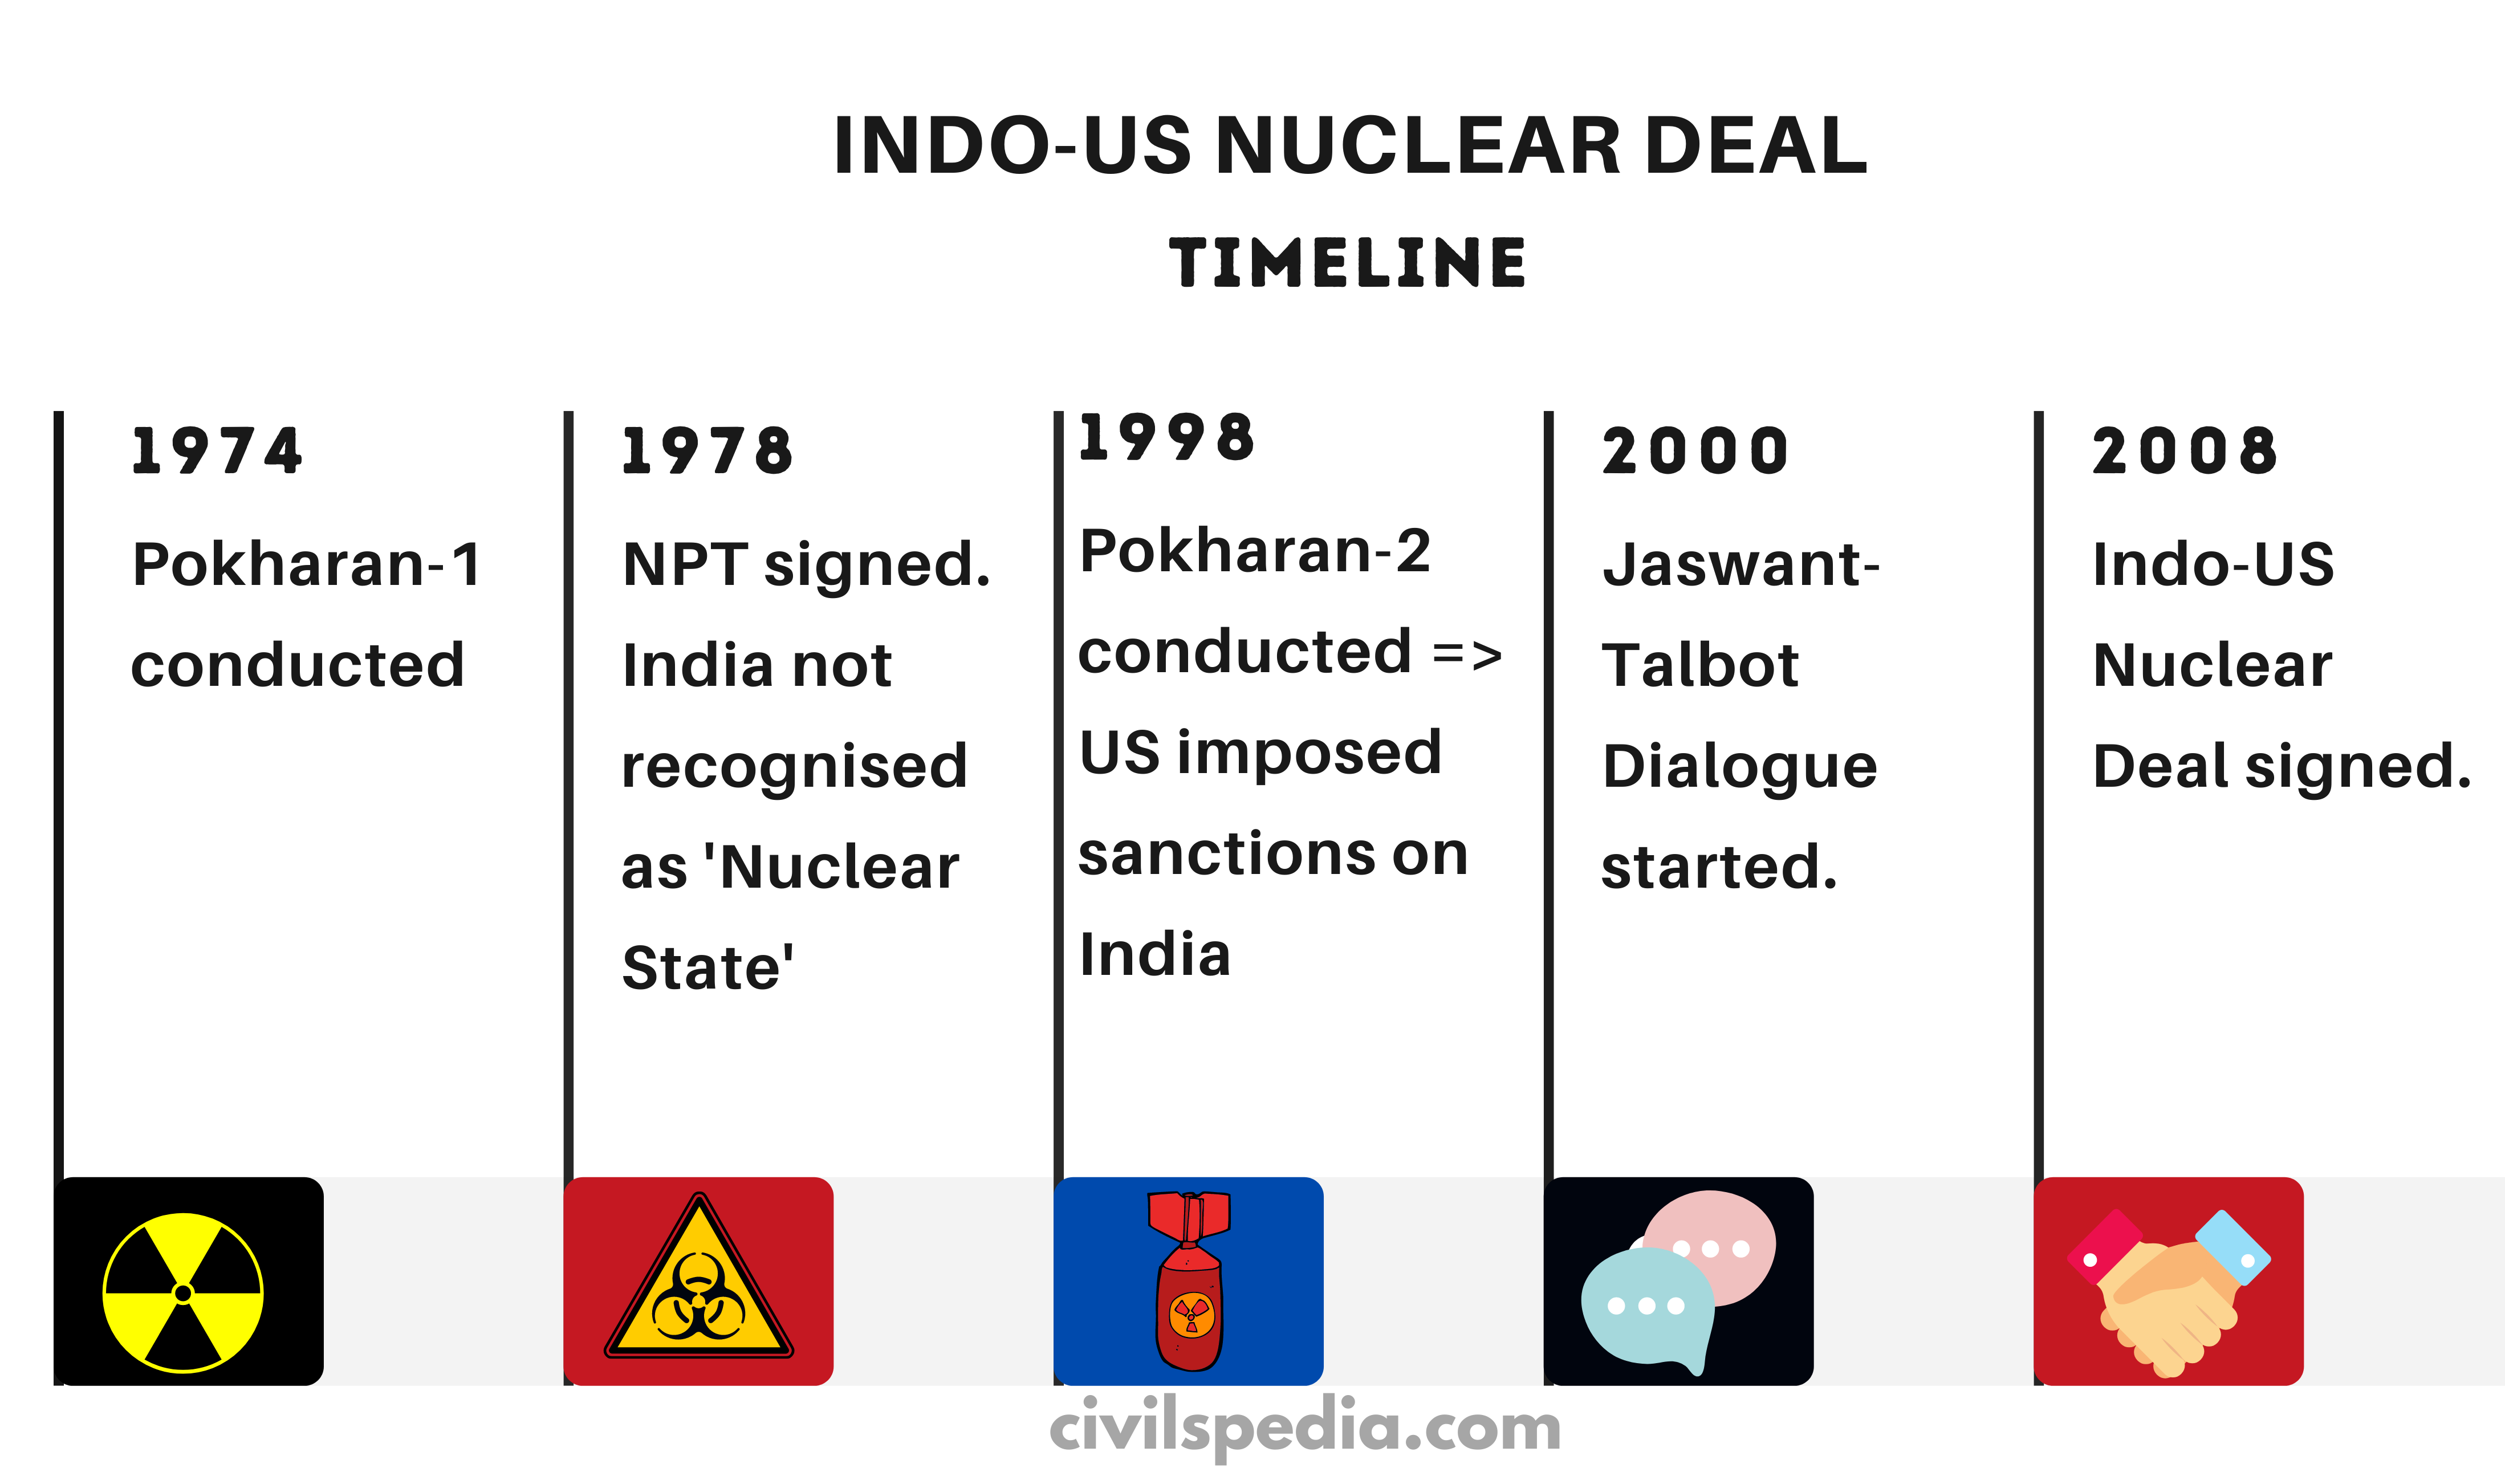 Timeline of Indo-US Nuclear Deal